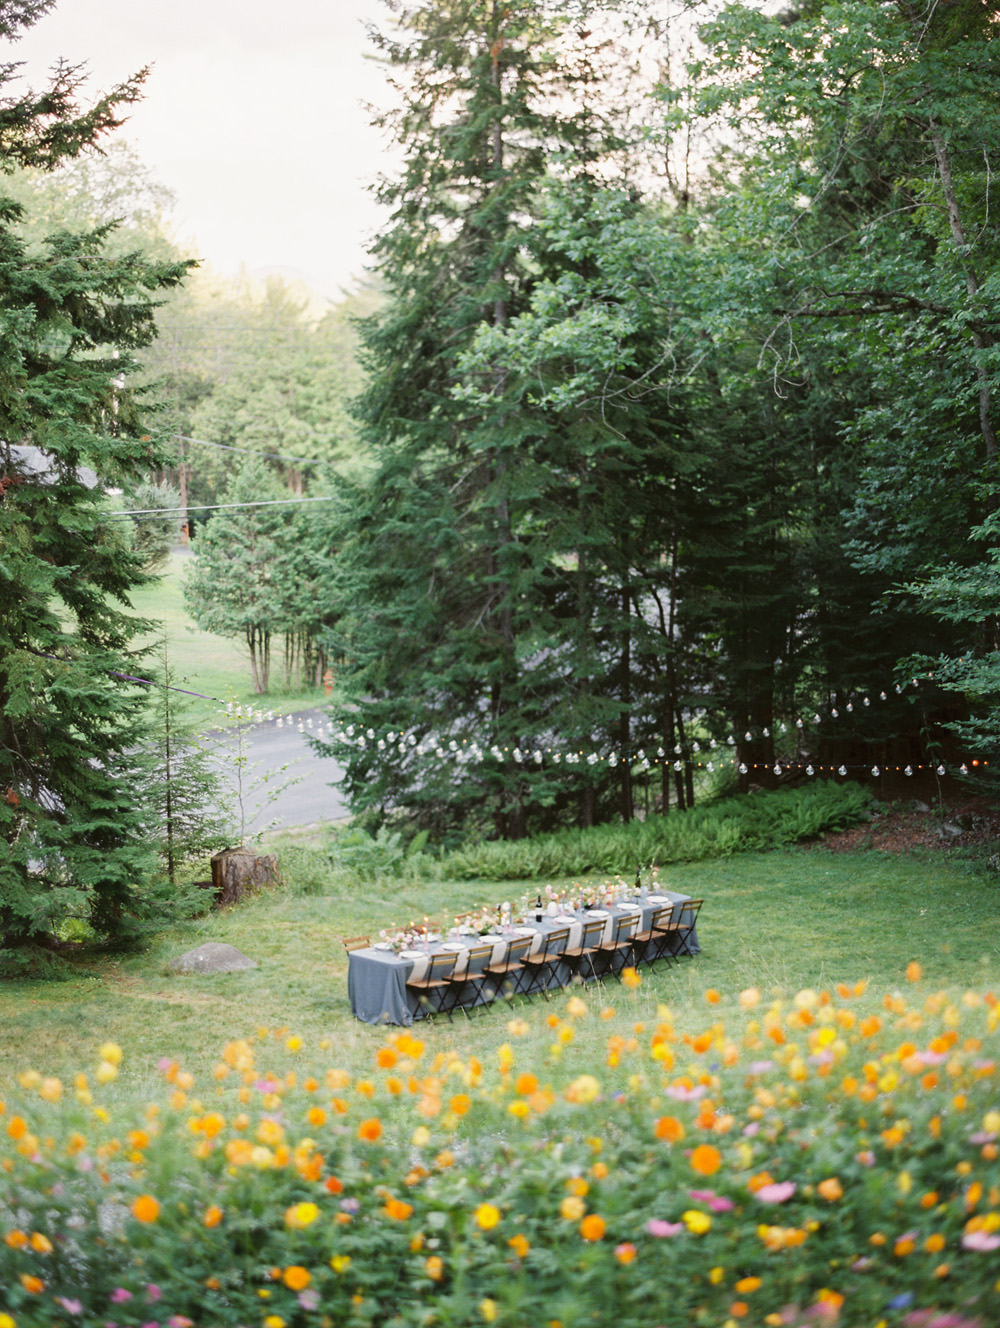 Front yard with wildflowers and table set for wedding dinner of 16 in the Adirondack mountains | Mary Dougherty Workshop Saranac Lake New York